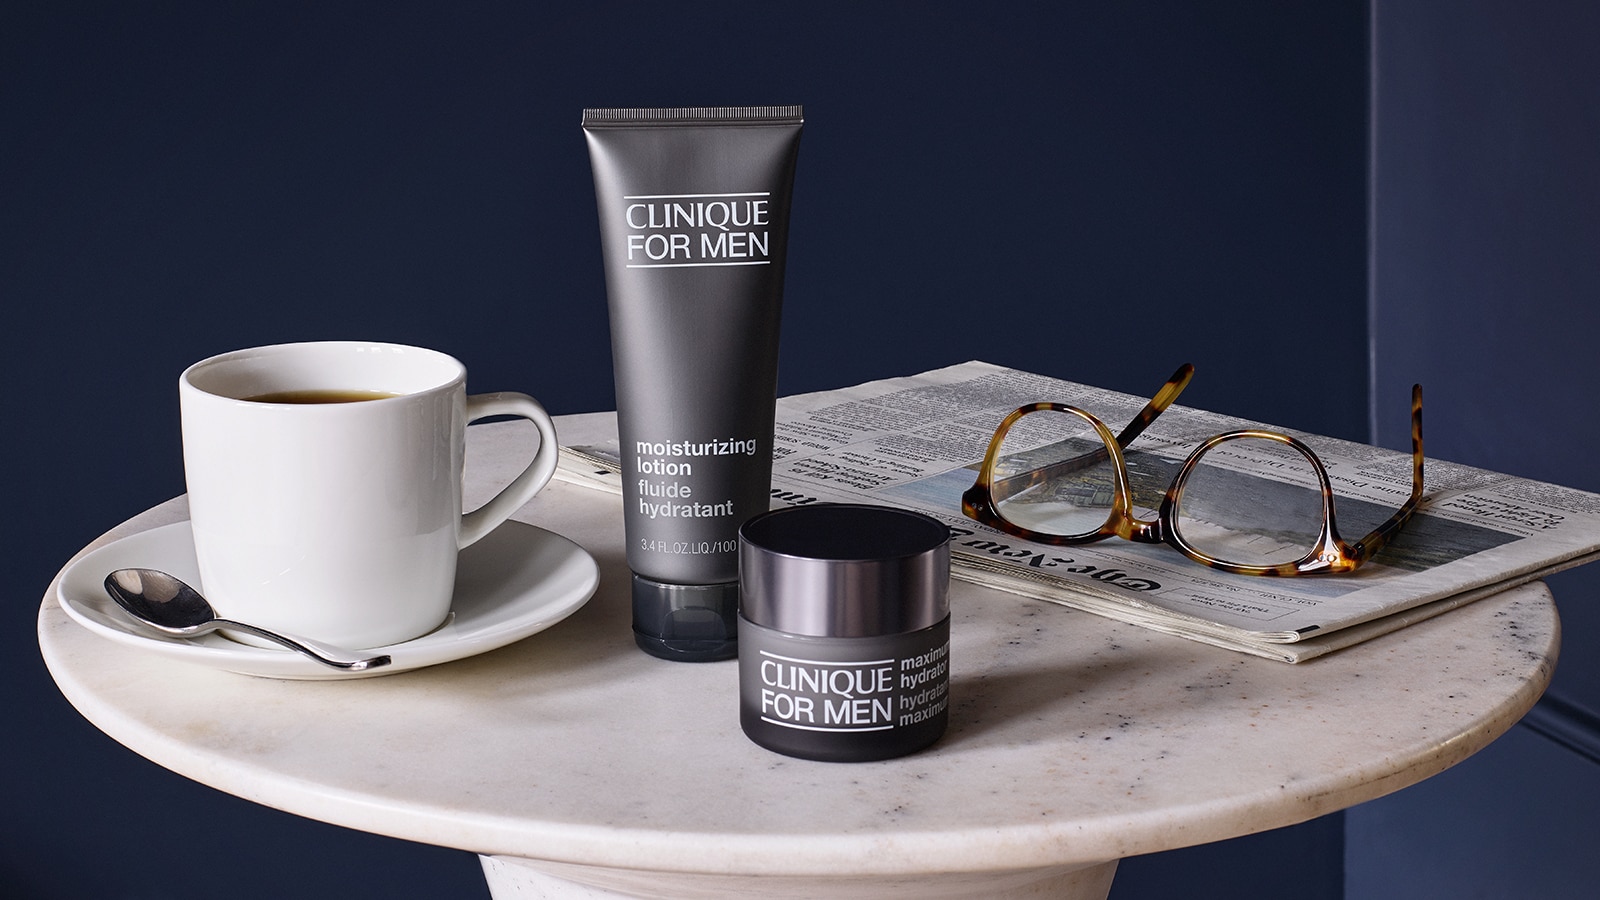 New To Us: Clinique For Men | The Journal | MR PORTER